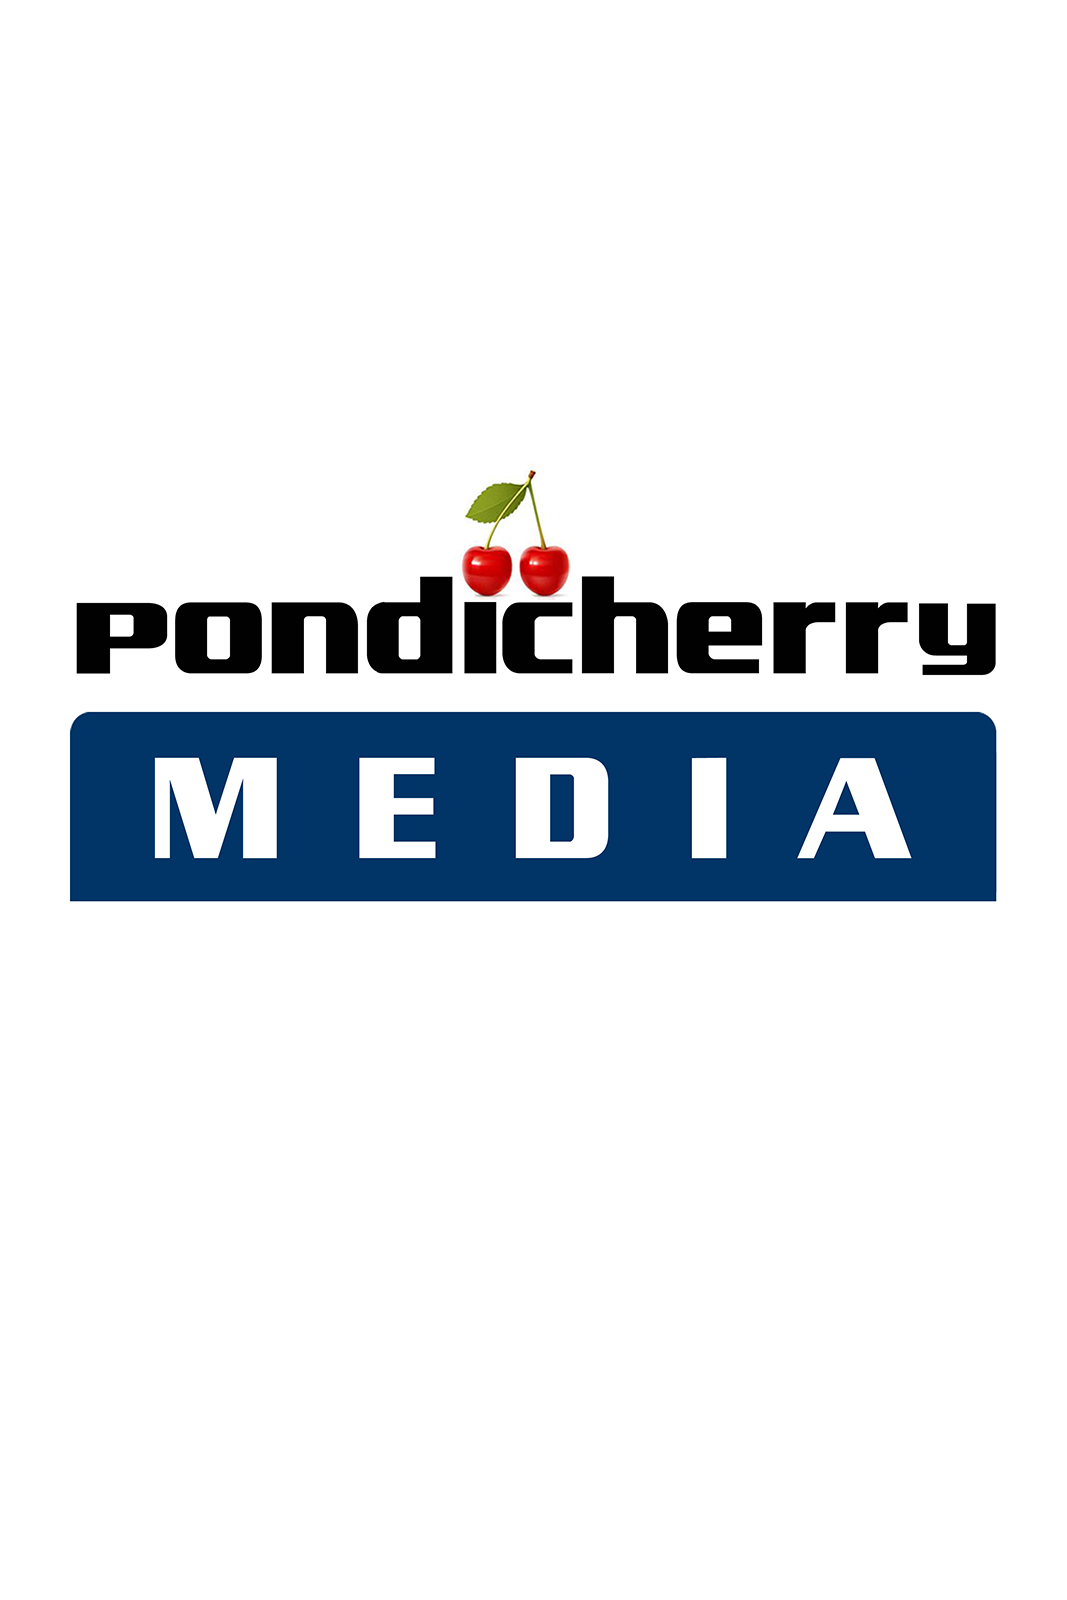 Pondicherry Media|Accounting Services|Professional Services